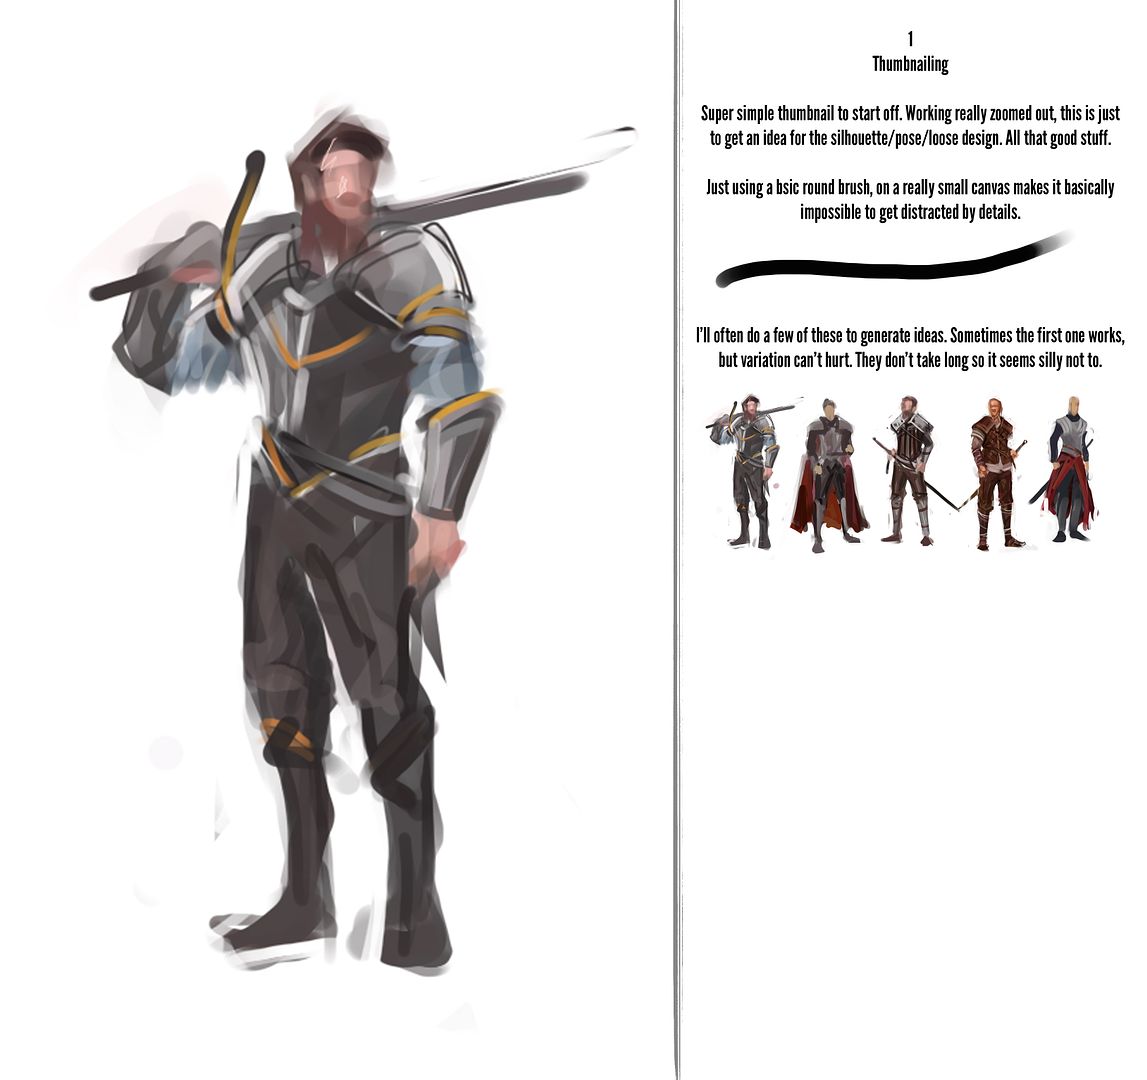 [Image: Knight_StepByStep_With_Notes_1.jpg]